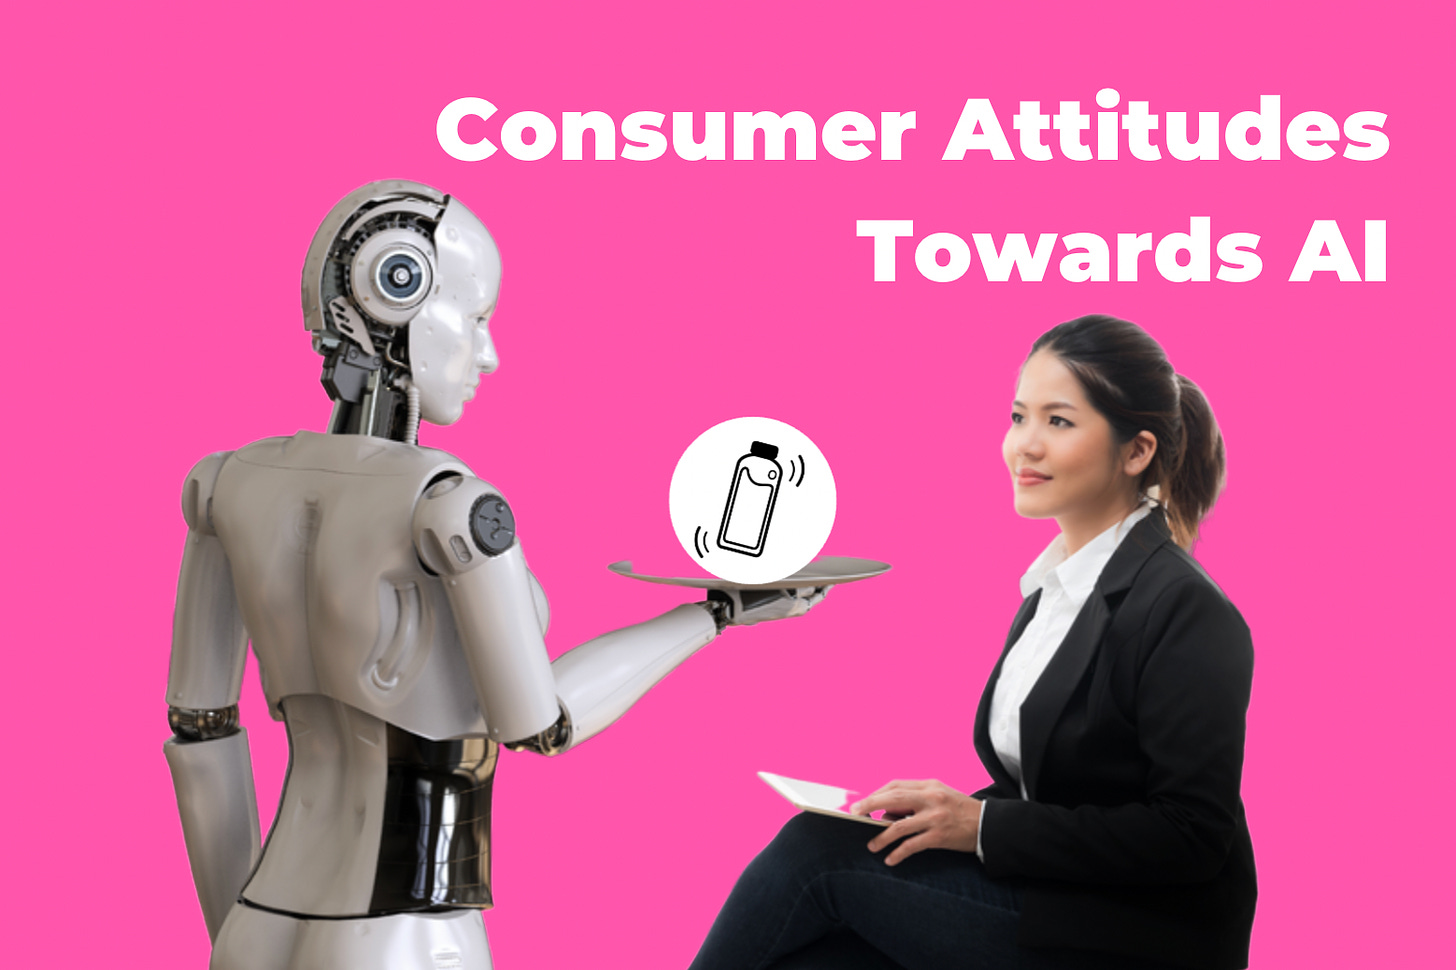 header image of robot serving a young woman to show consumer attitudes to AI